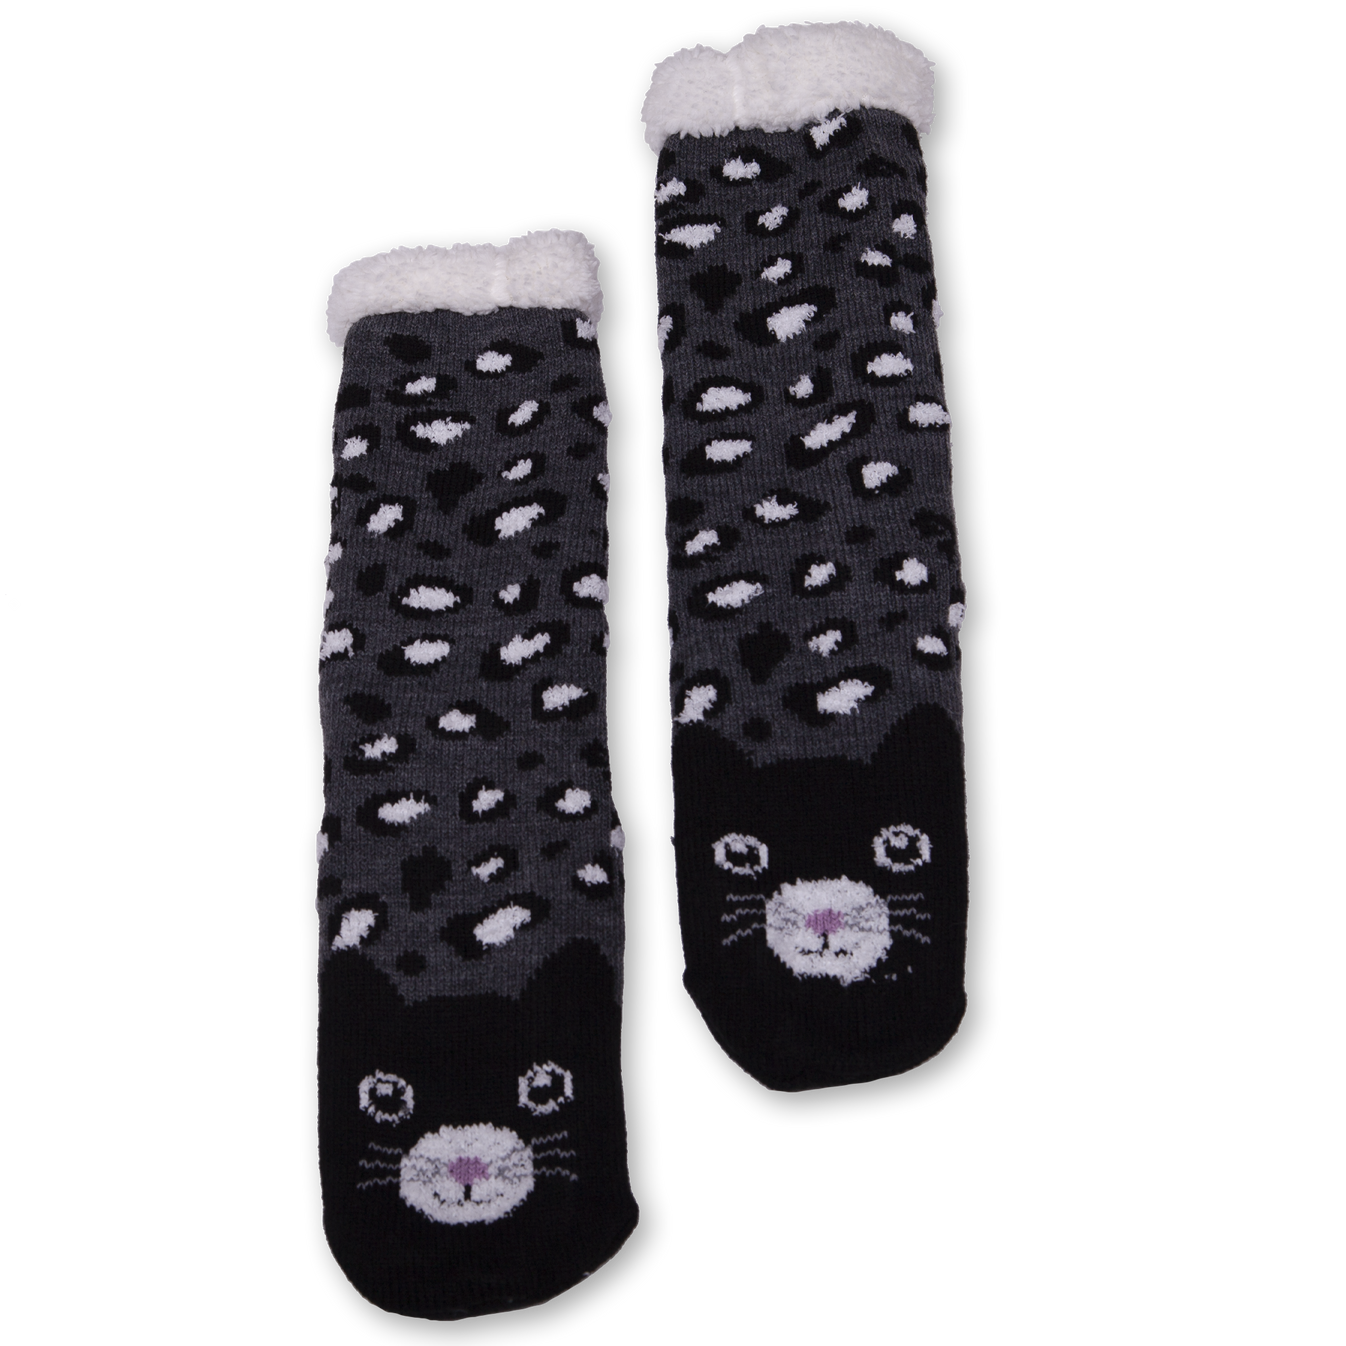 Long Cozy Slipper Socks with Grippers and Sherpa Lining | Women | Fuzzy ...